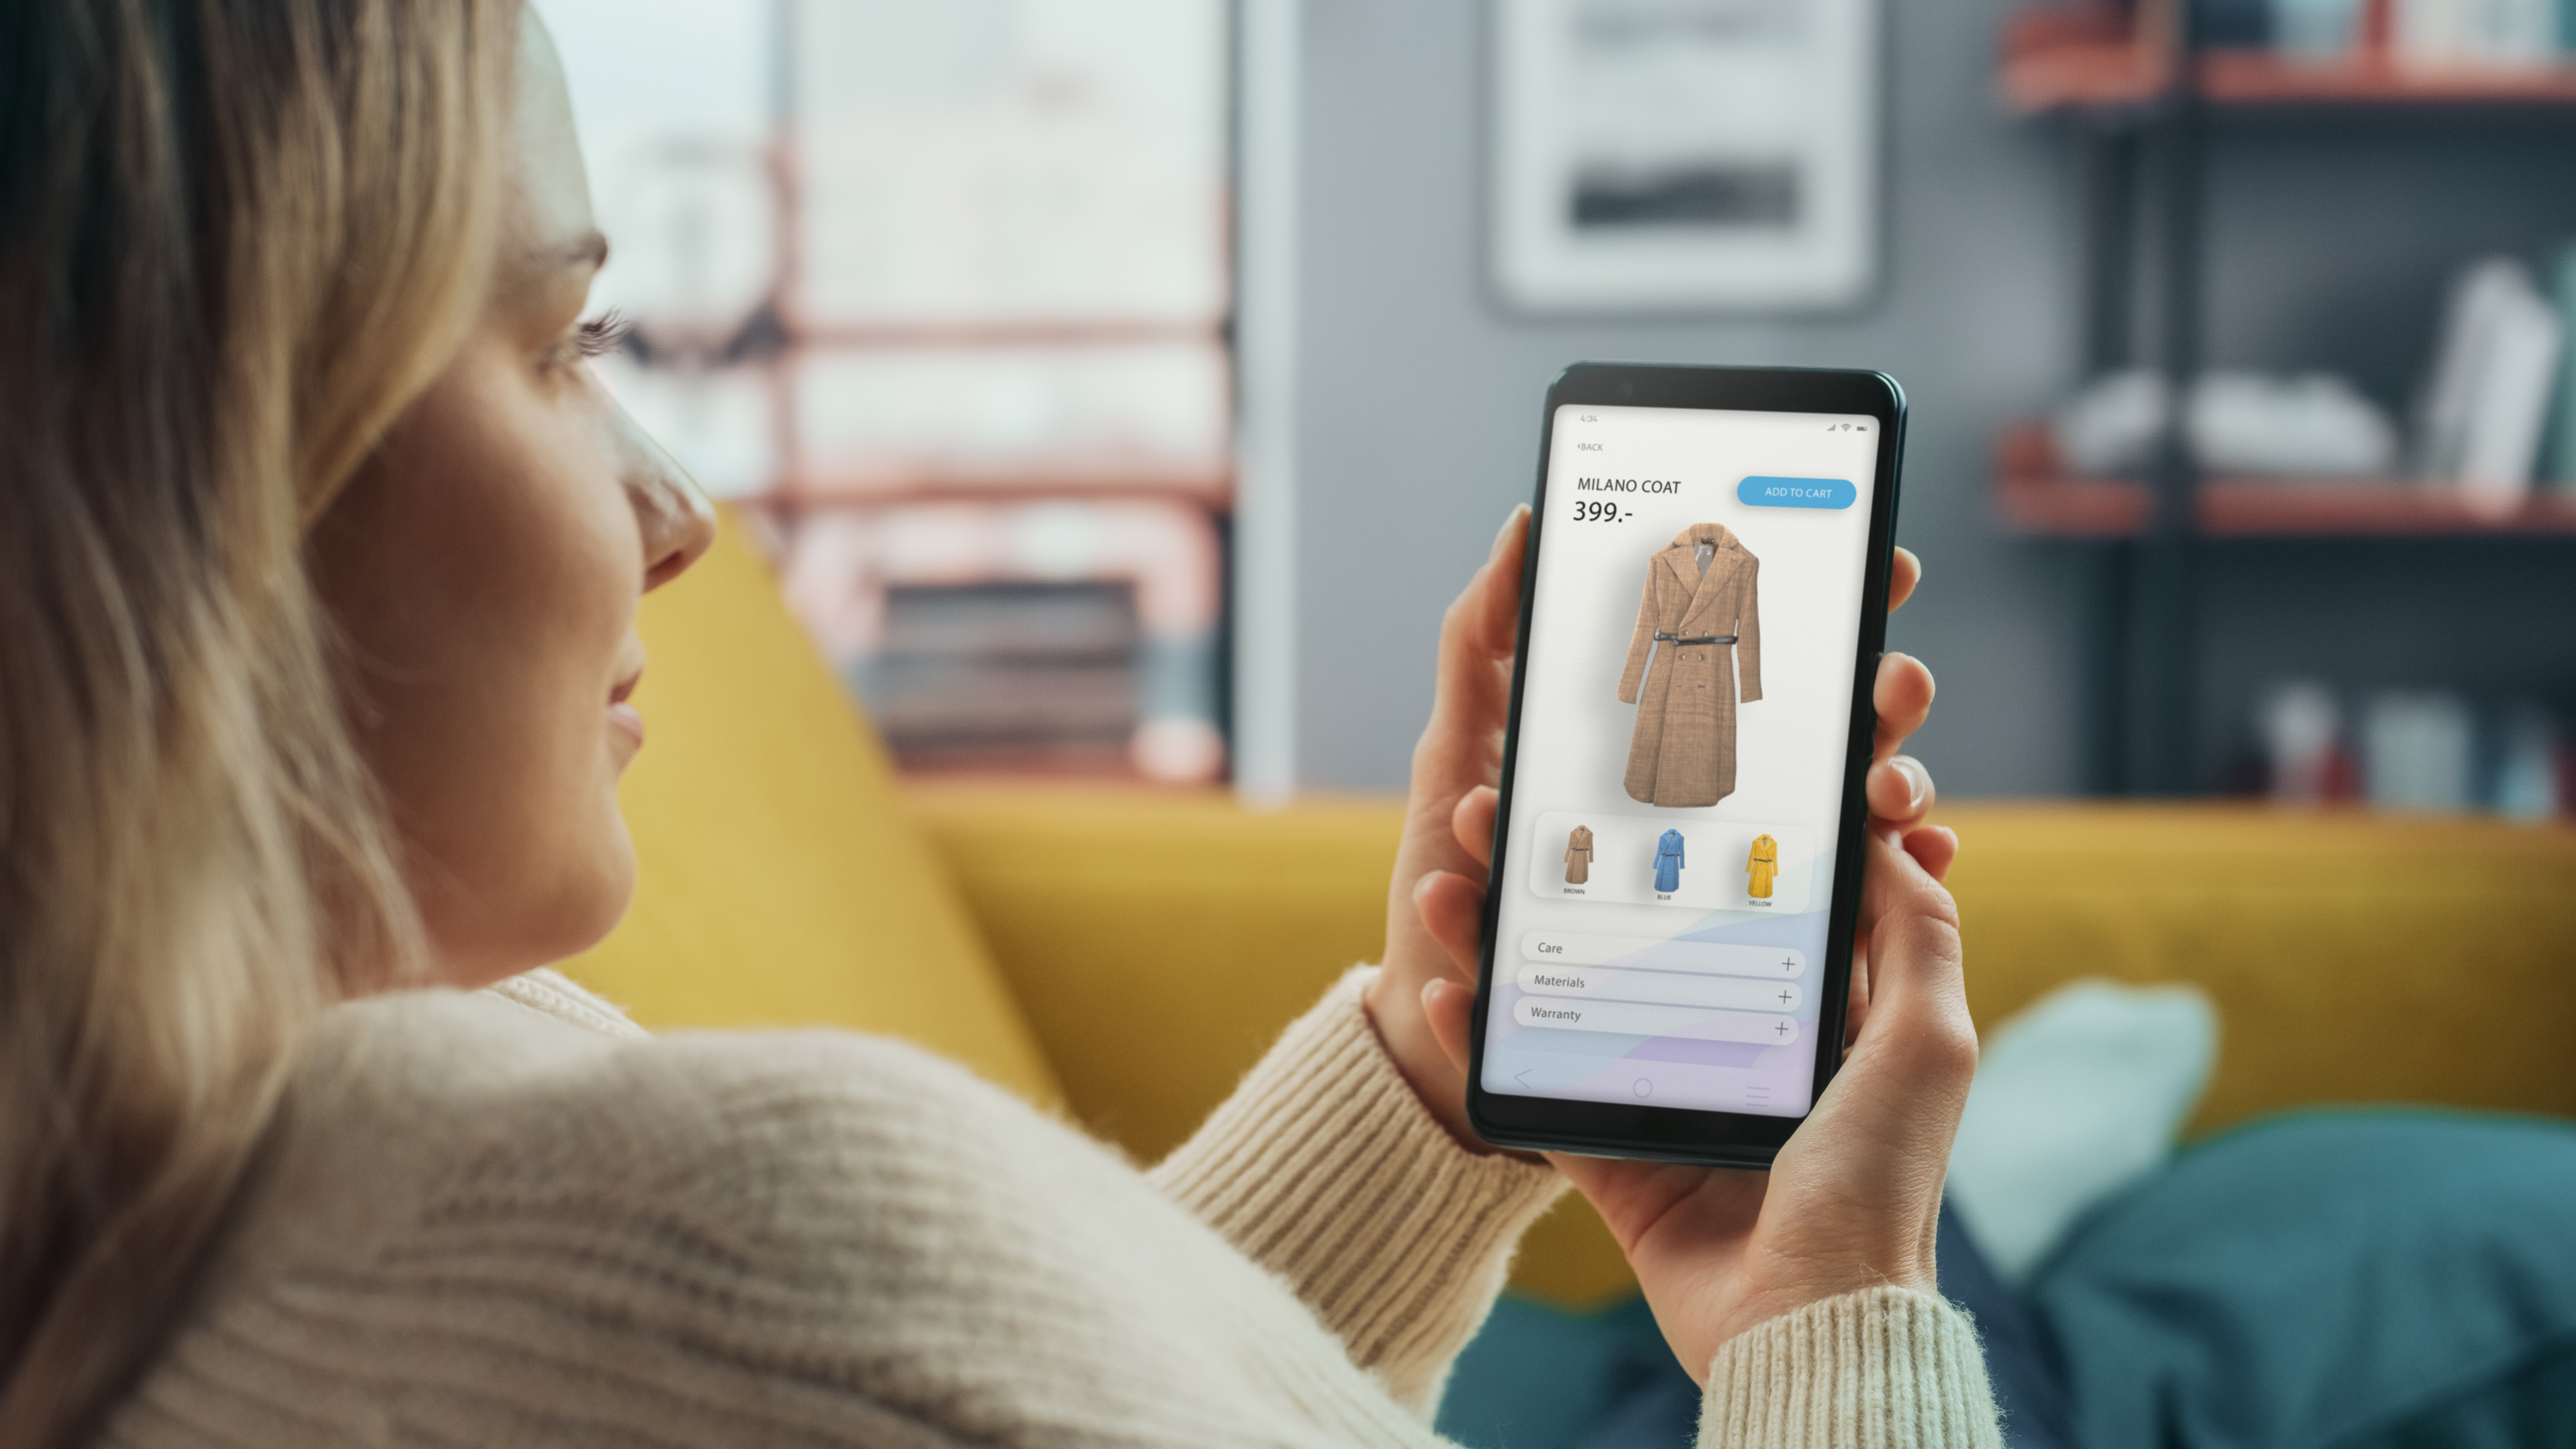 A woman is shopping for clothes on her smartphone